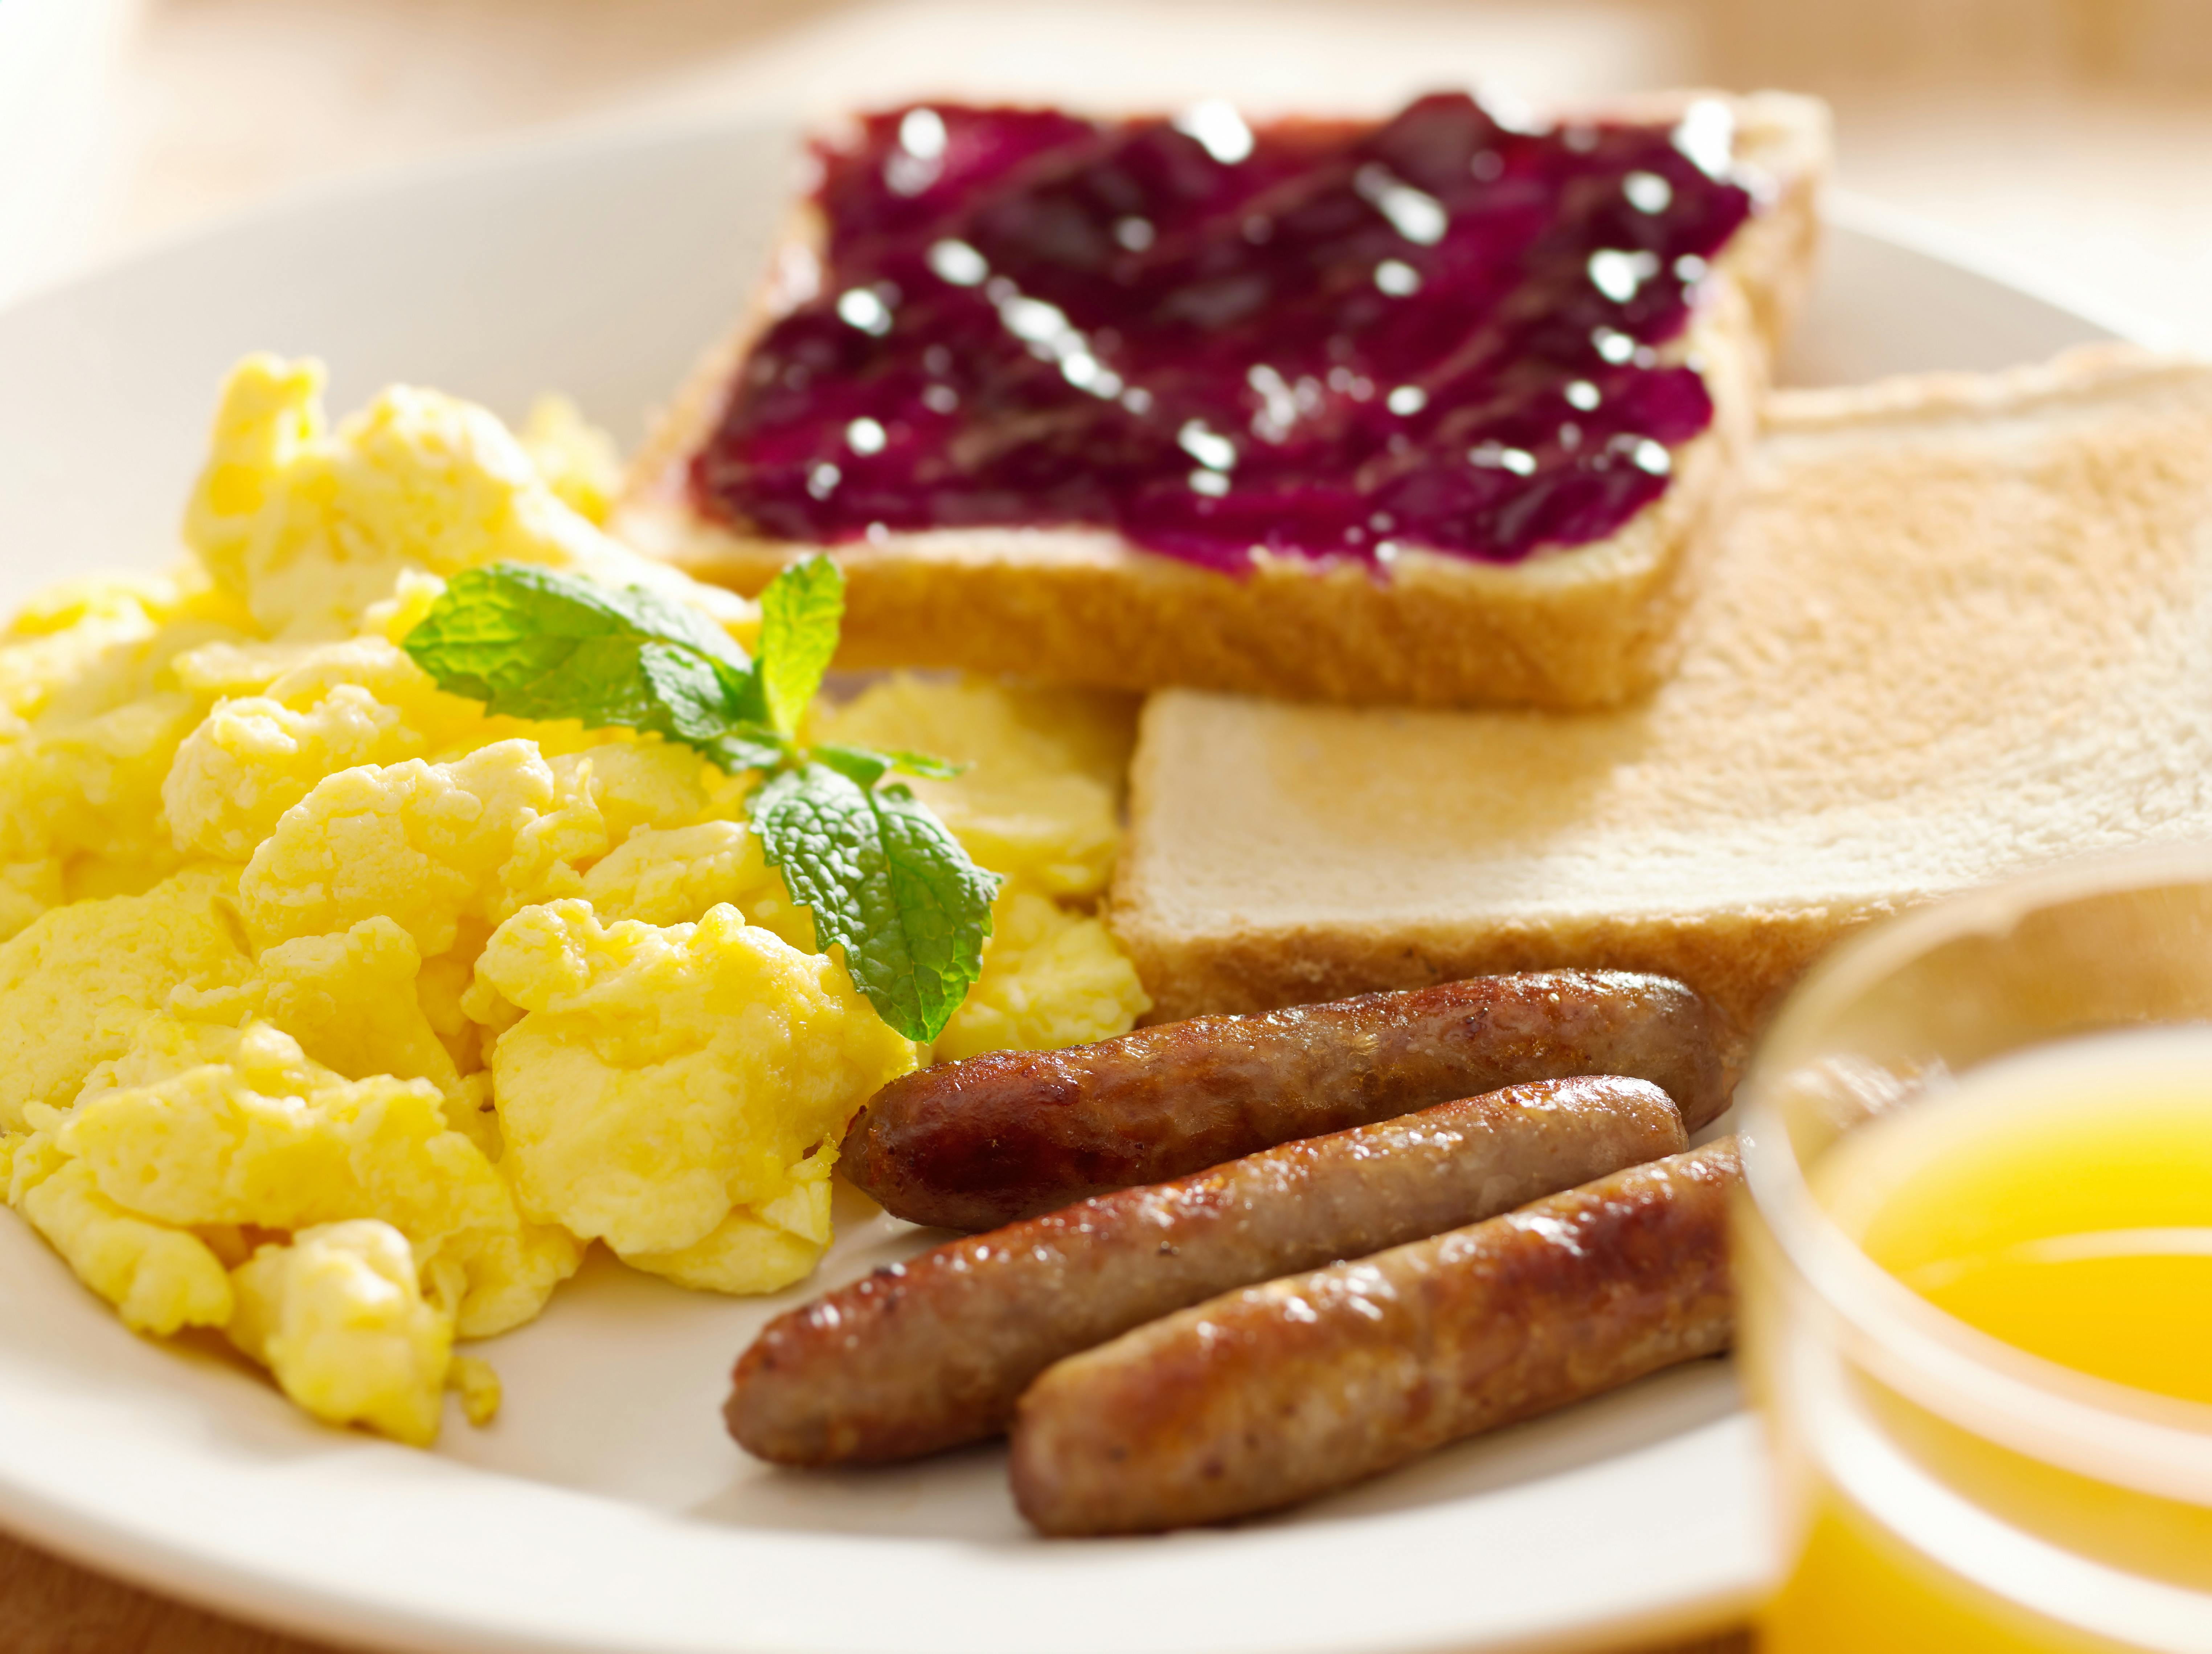 scrambled eggs, toast with jam, and sausage on a plate with a glass of orange juice